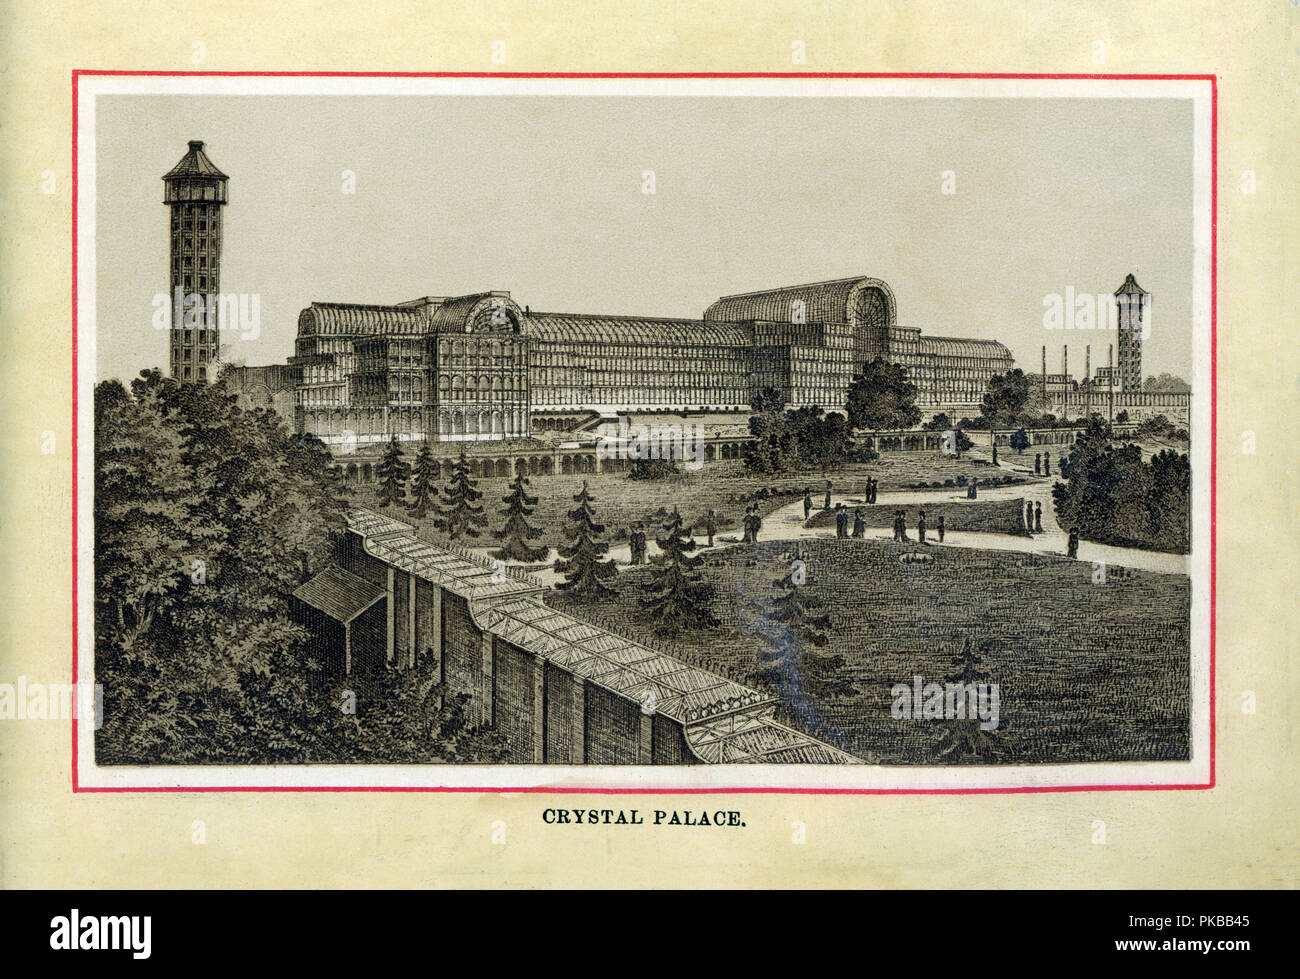 The Crystal Palace, 1880 high quality steel engraving of the iron and glass exhibition hall designed by Joseph Paxton for the Great Exhibition of 1851 and then transferred to Sydenham, water towers designed by Isambard Kingdom Brunel Stock Photo